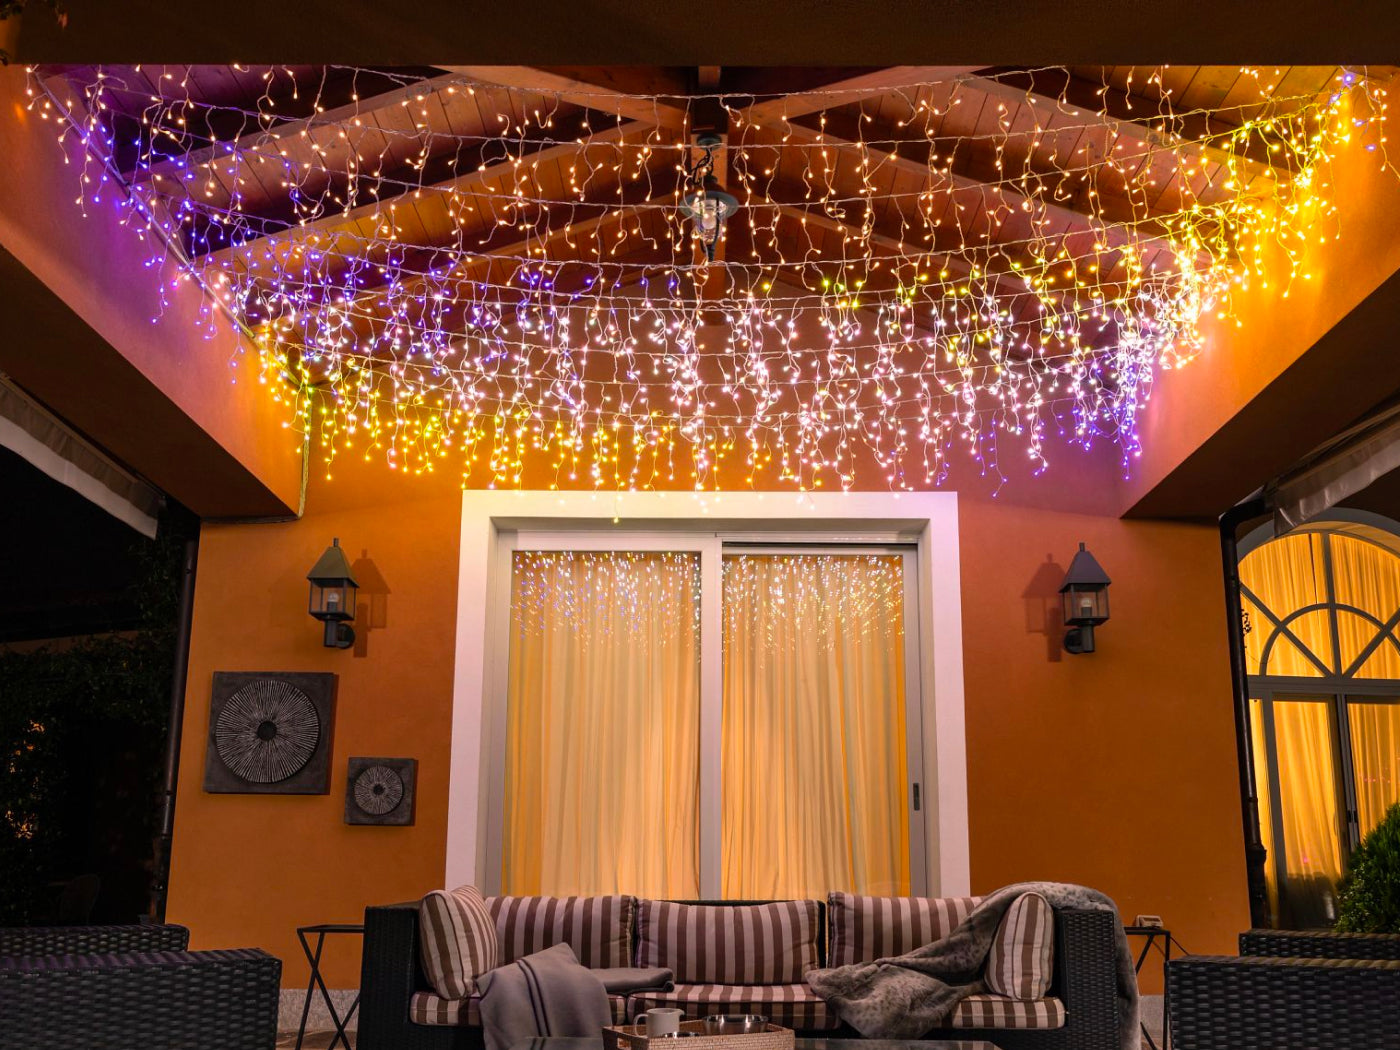 Creative ways to use your Christmas lights year-round